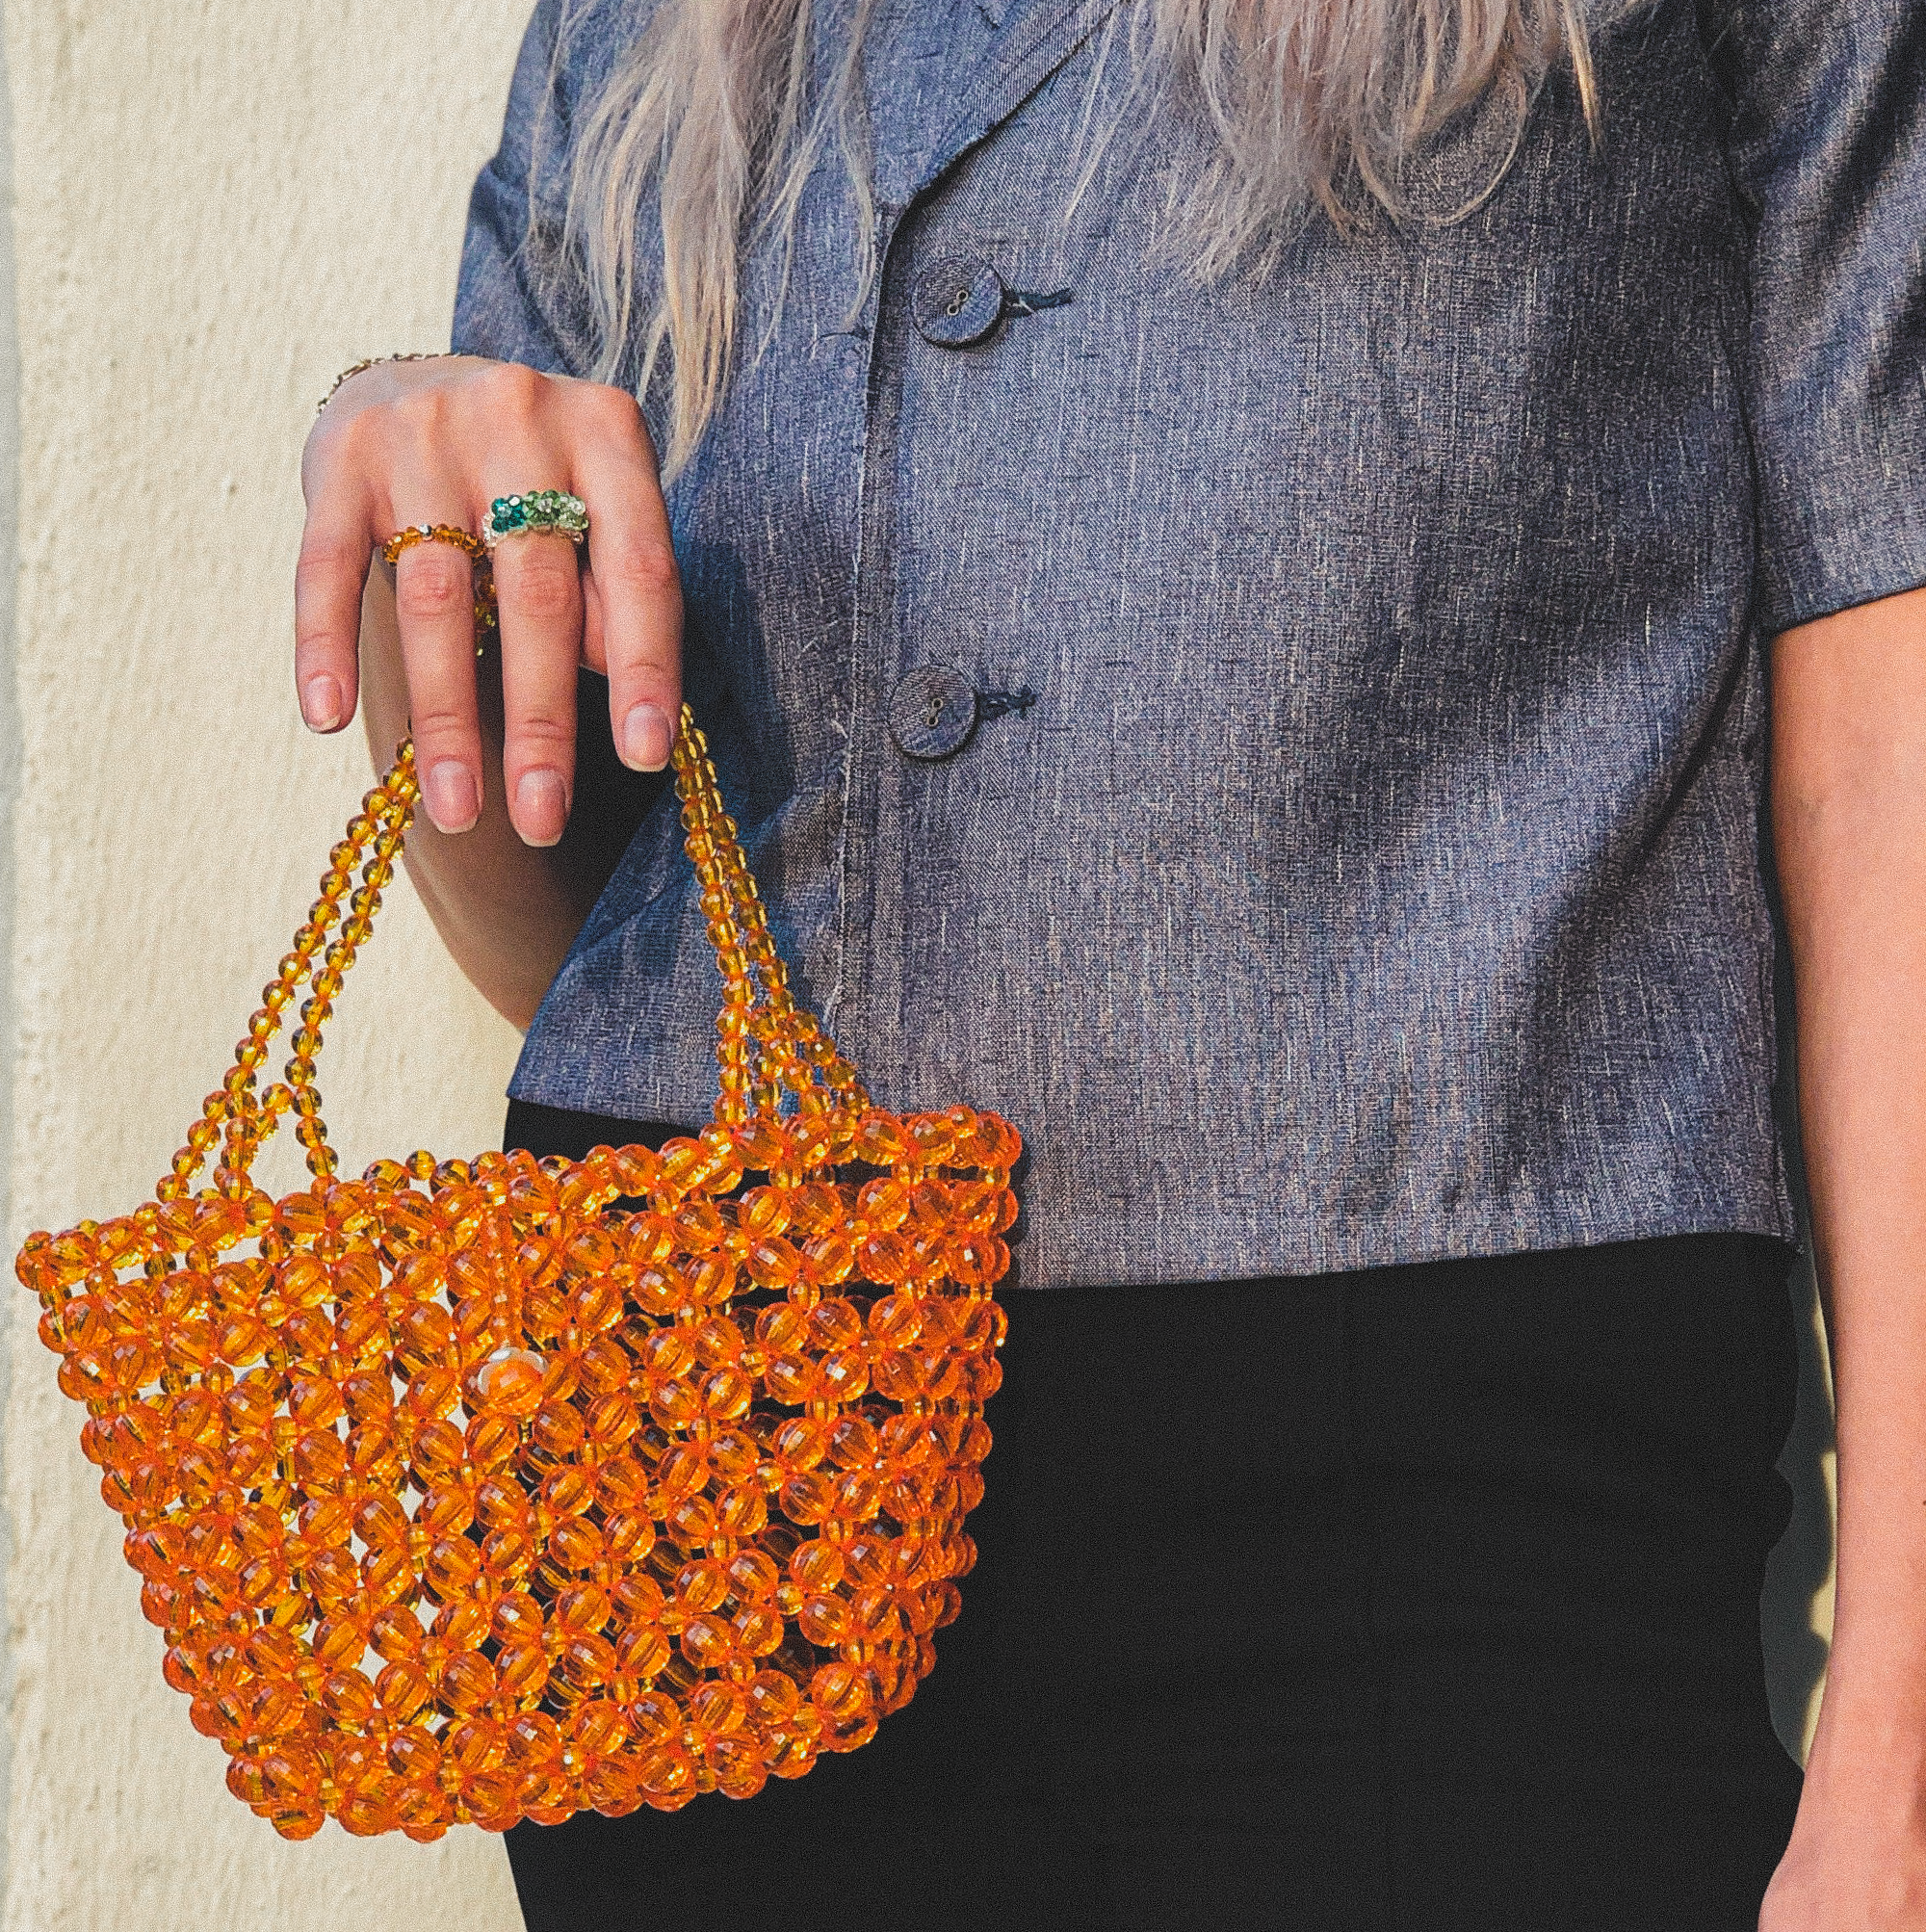 Clementine Beaded Bag by Veronique